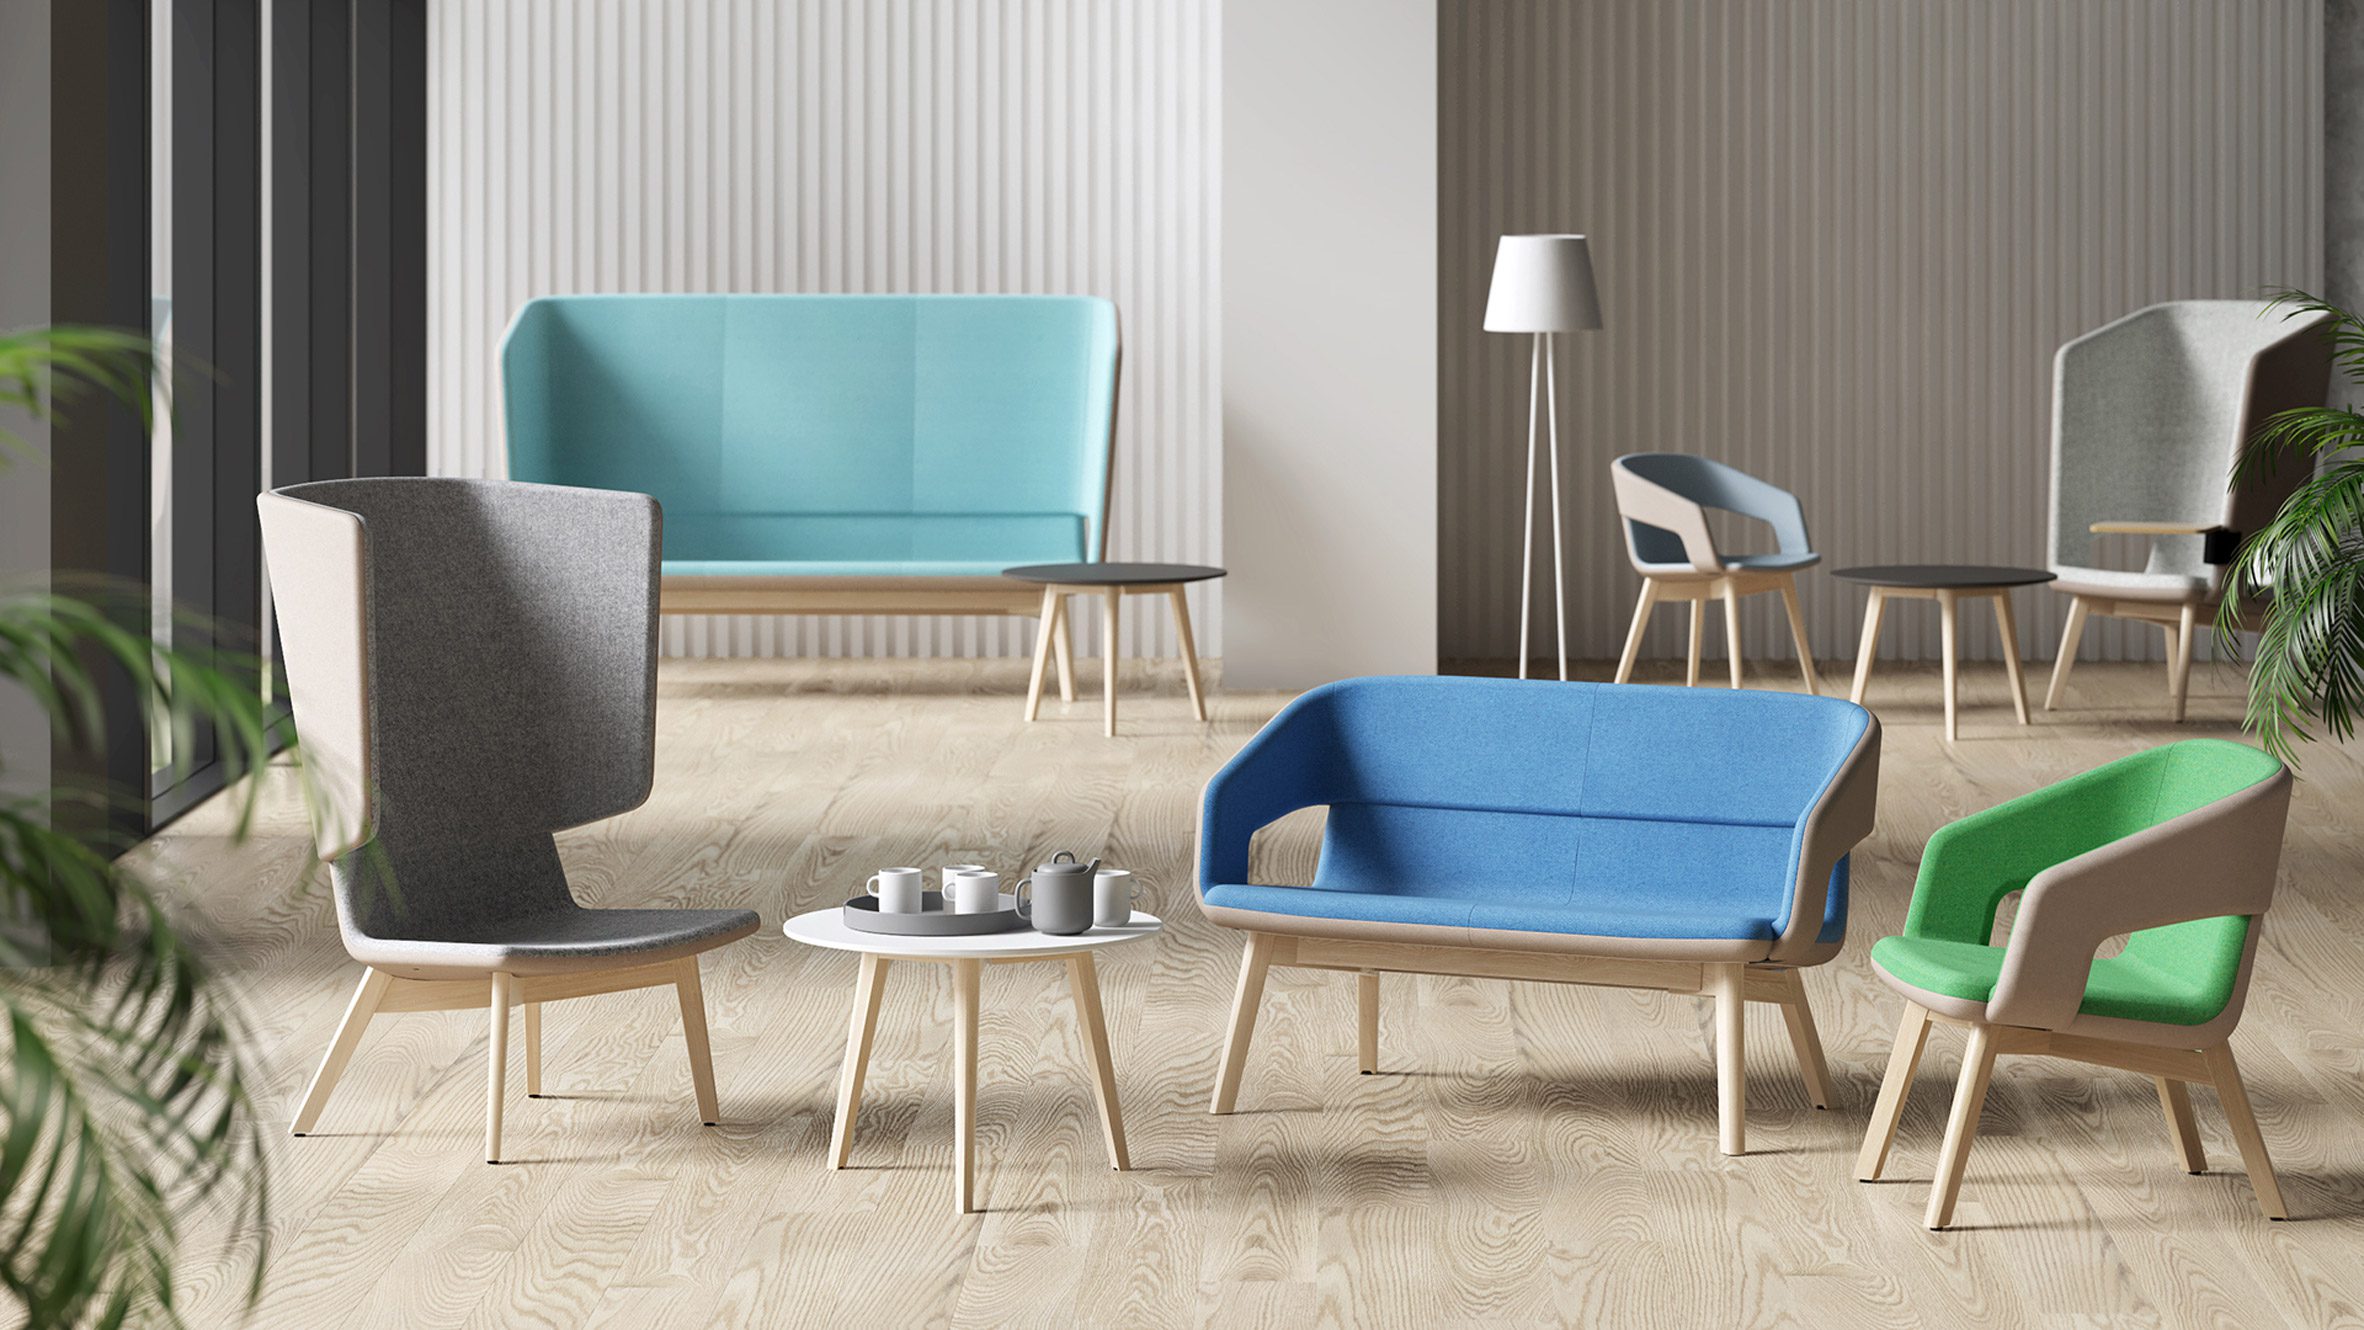 Twist & Sit Soft sofas and chairs by Christina Strand and Niels Hvass for Narbutas